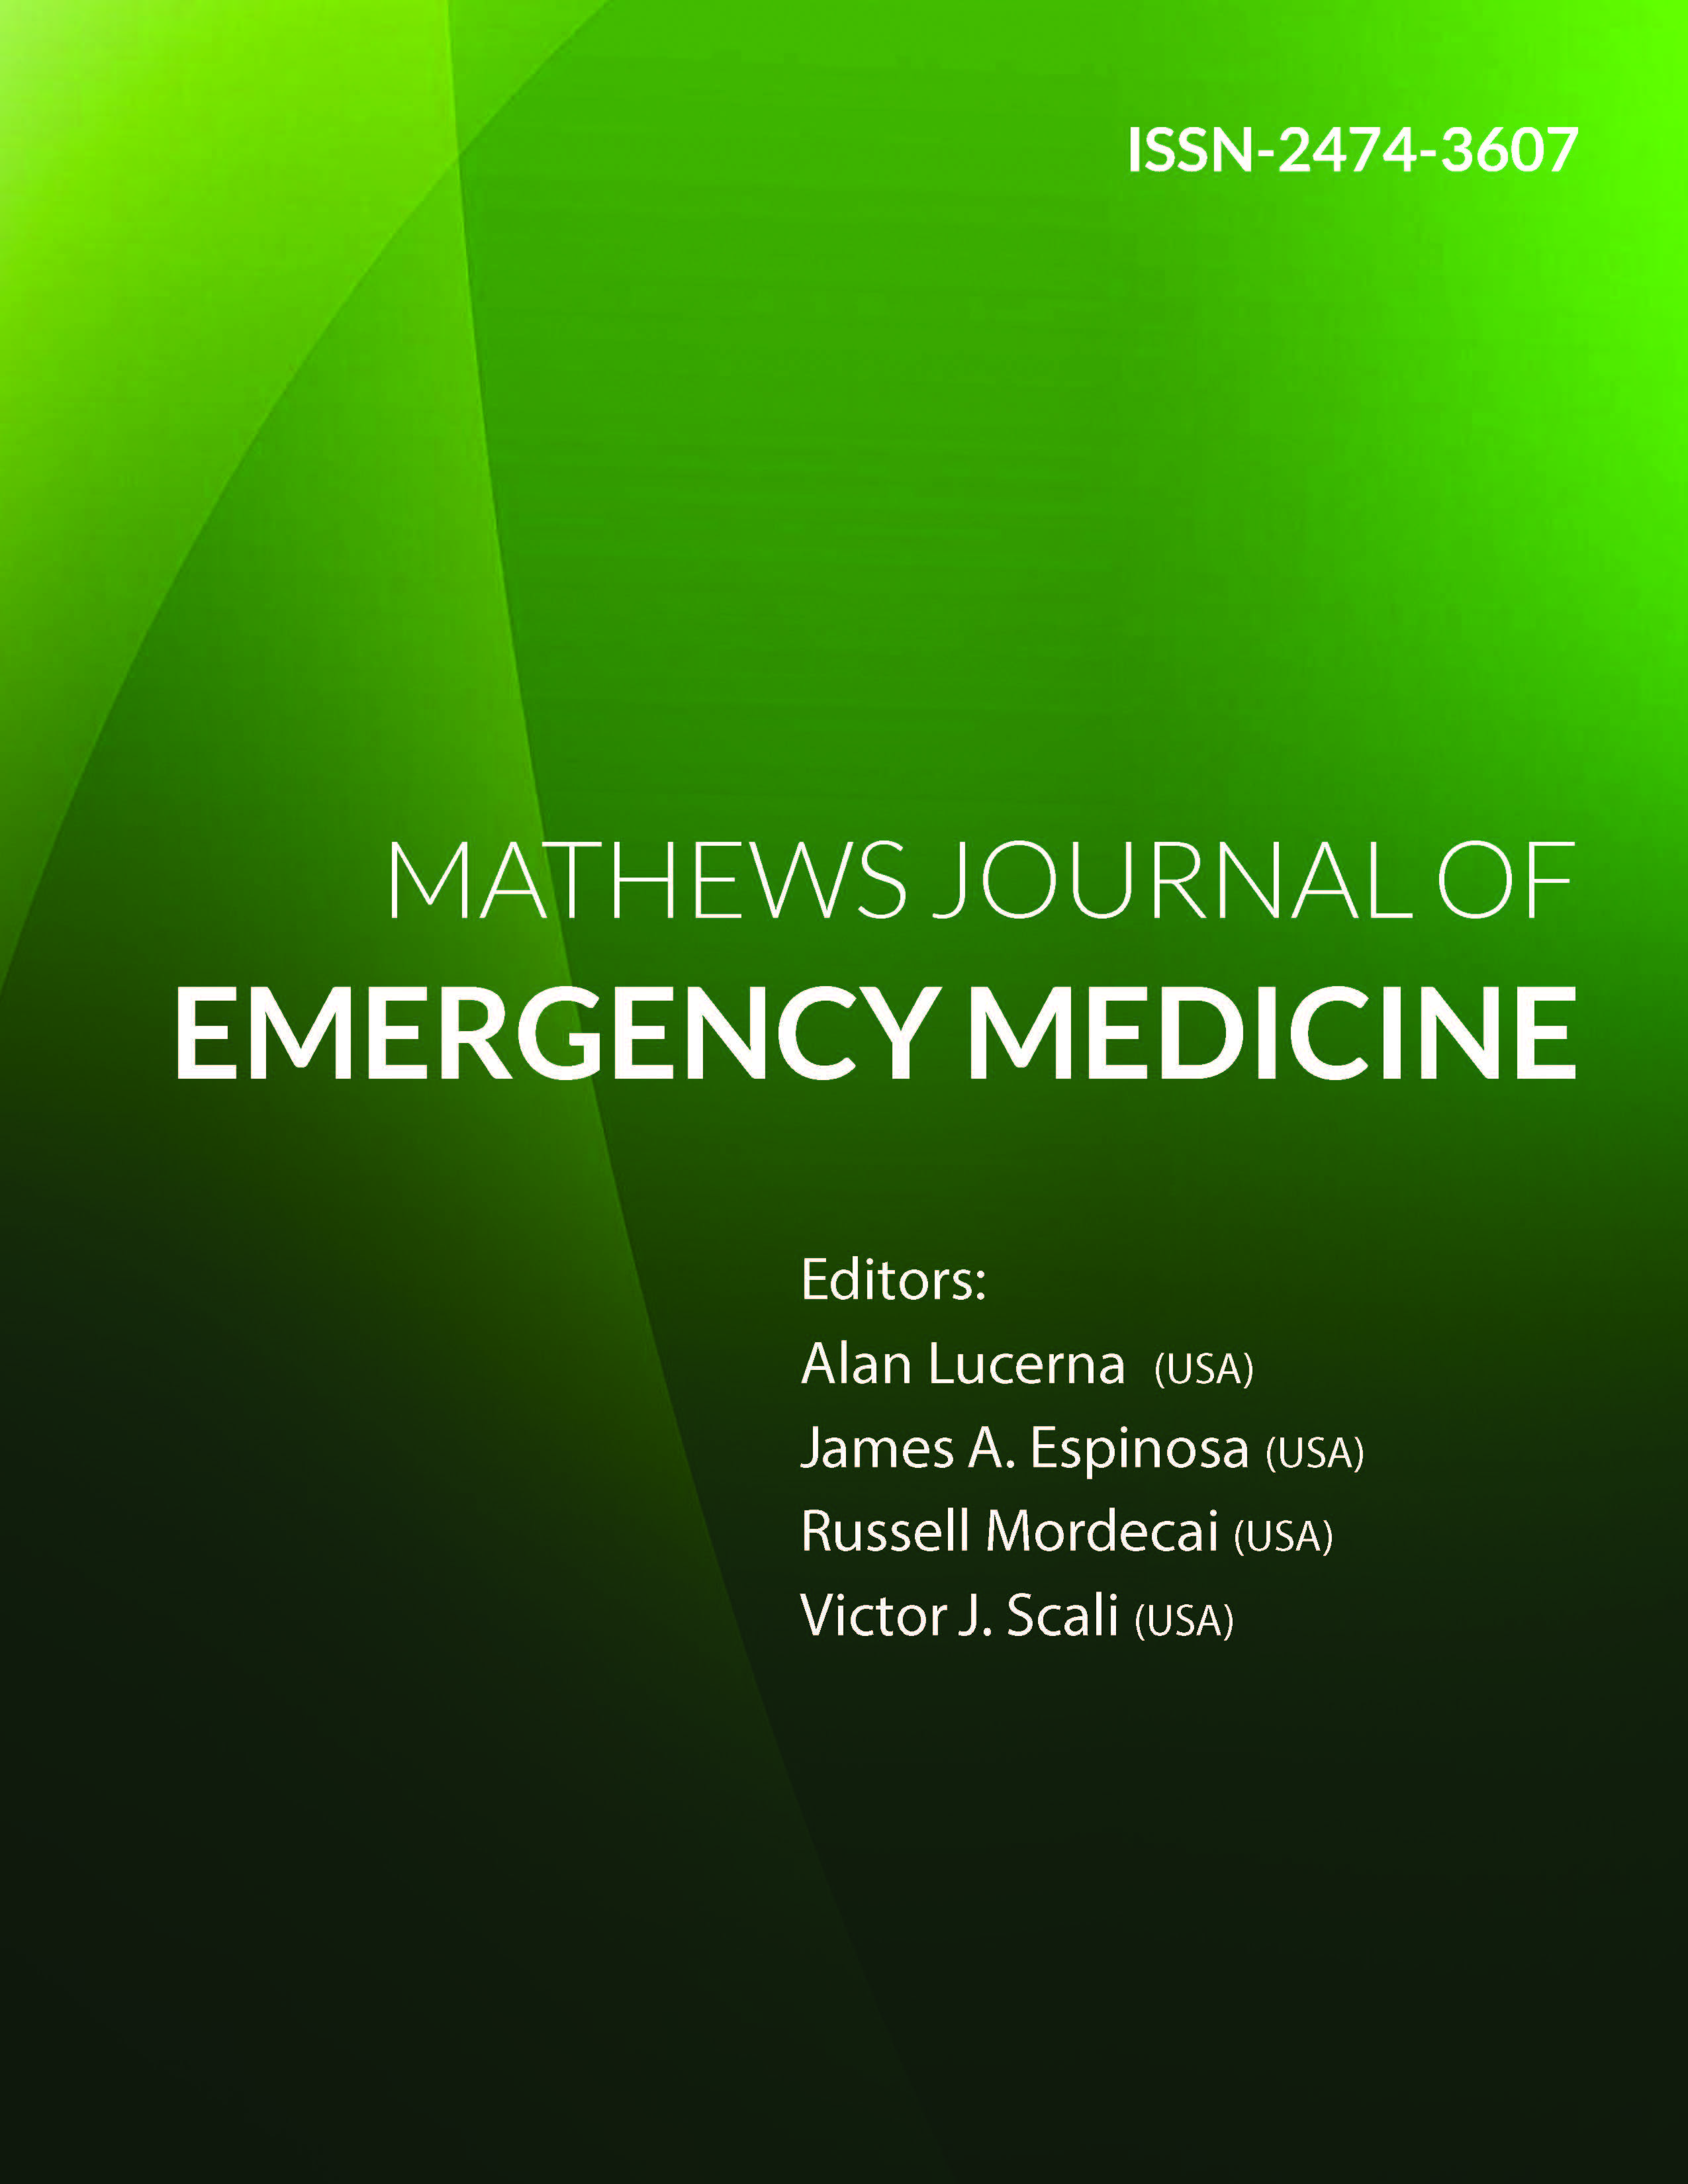 thesis in emergency medicine